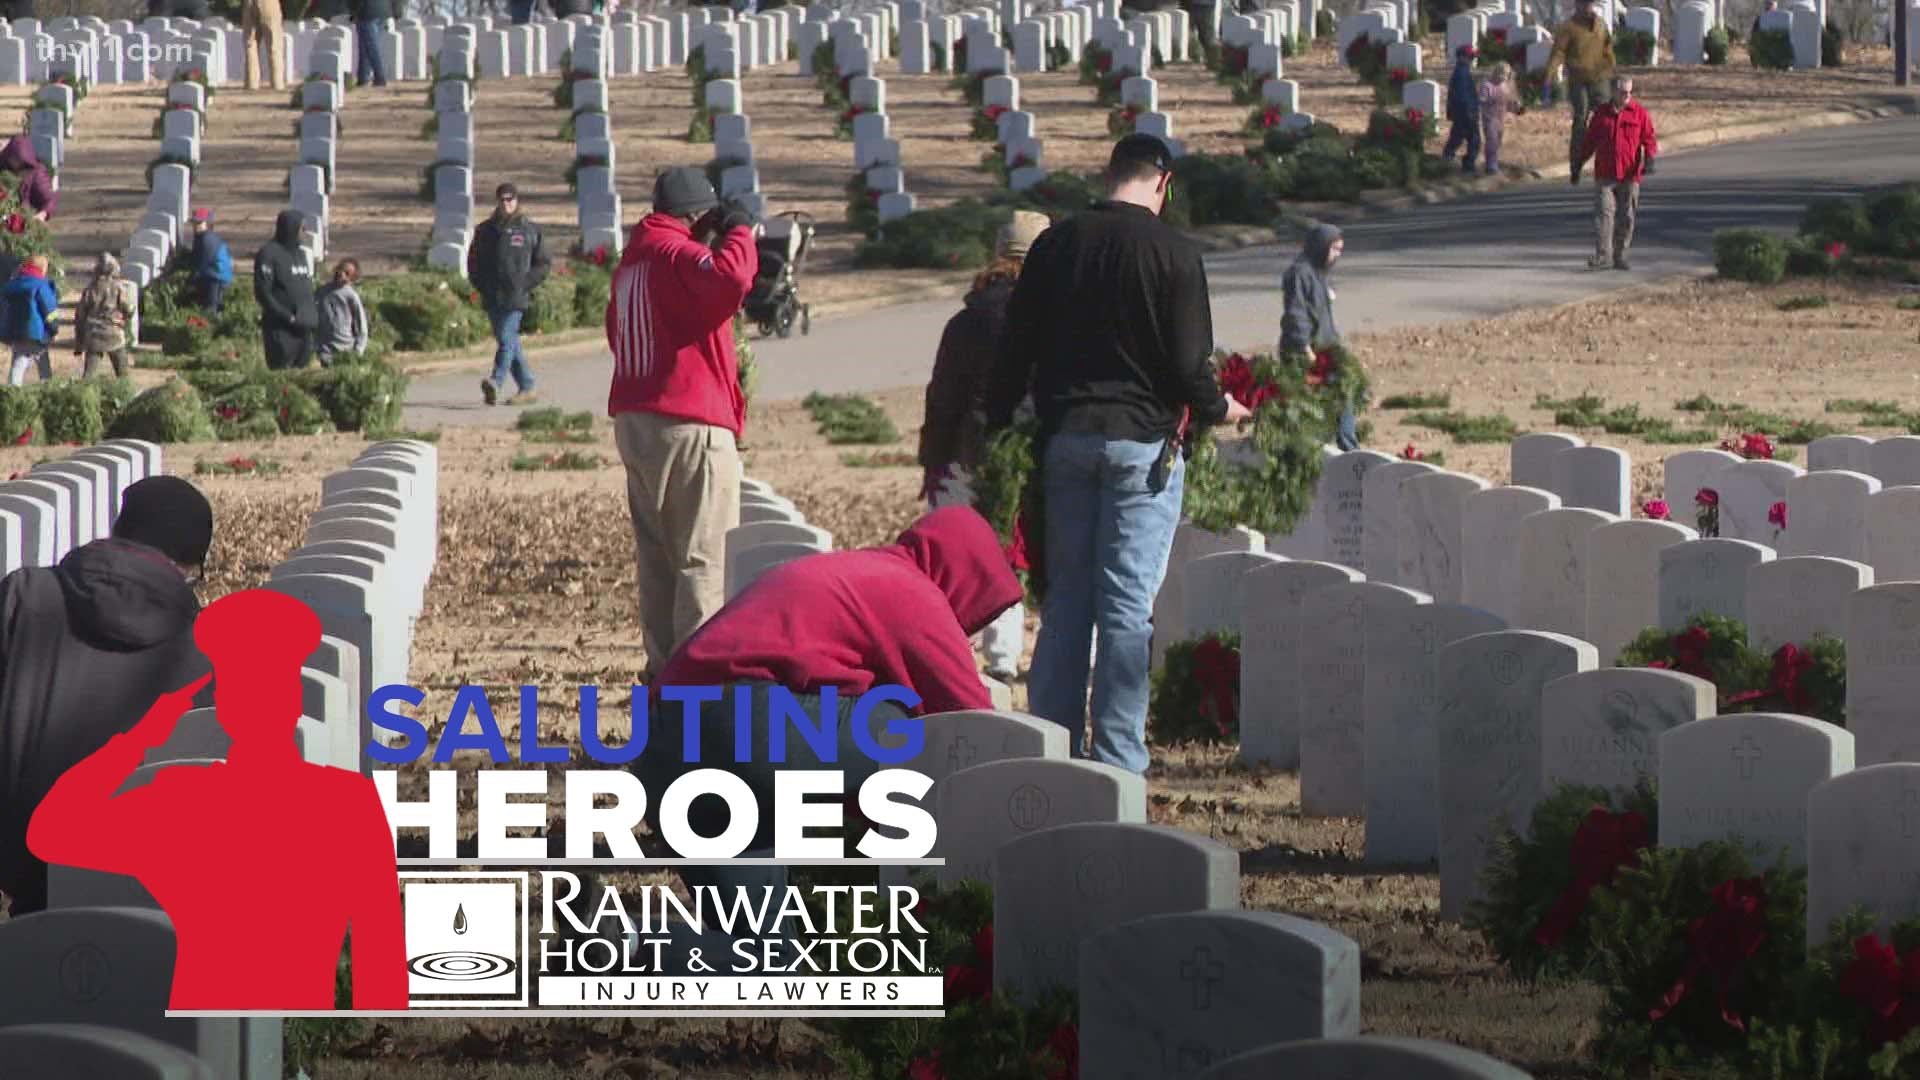 Wreaths Across America always has a huge turnout, and now we're saluting the heroes behind the scenes that make the event possible.